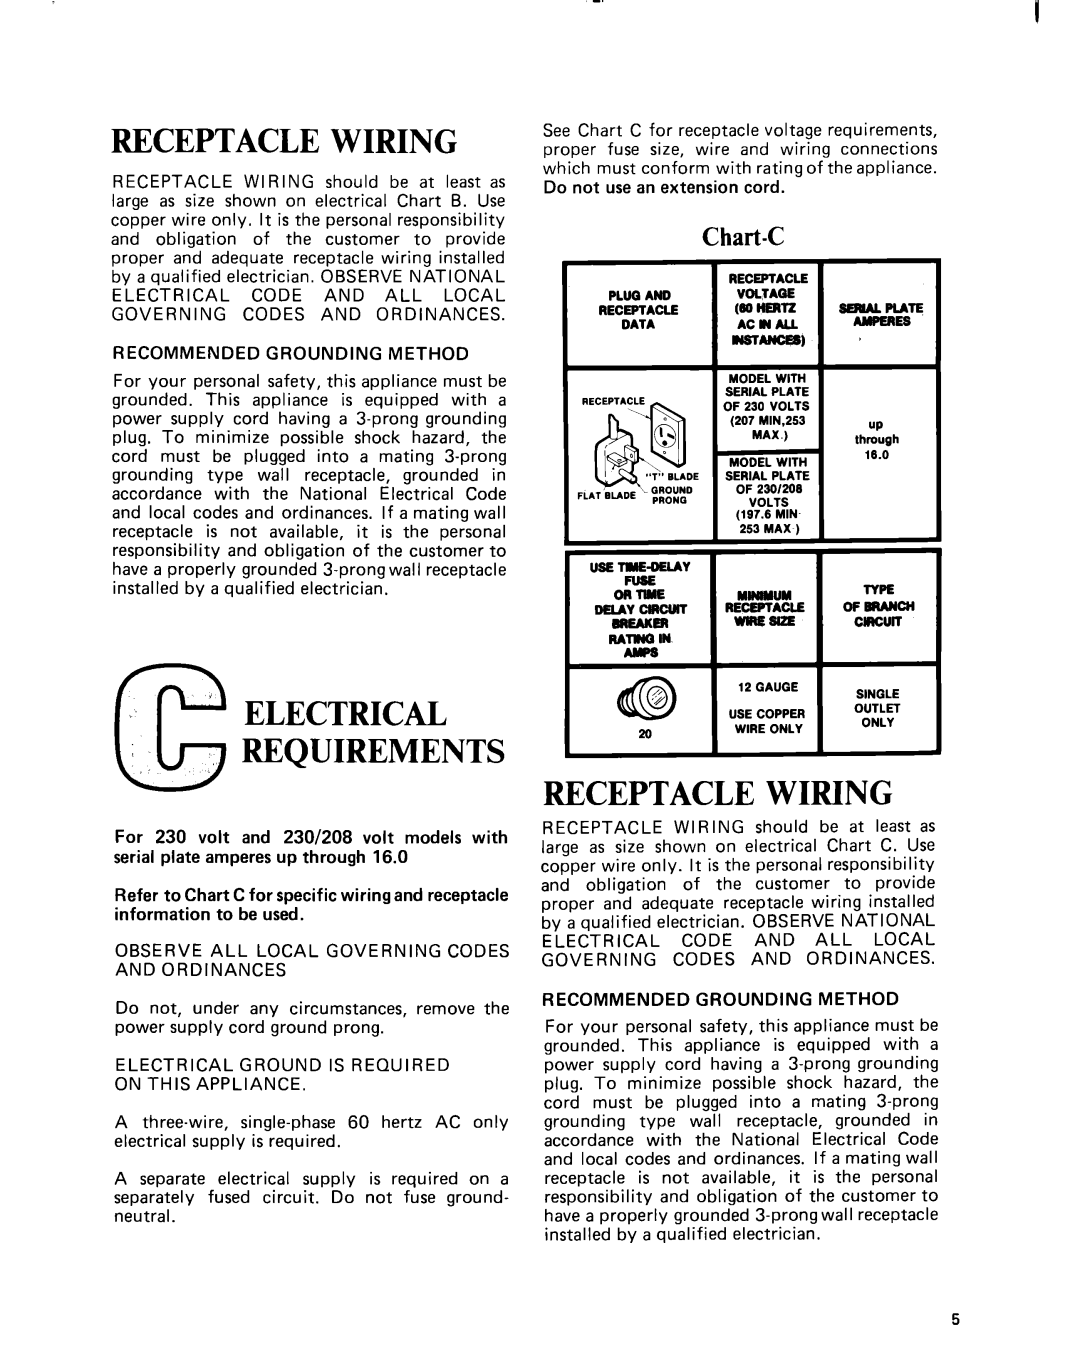 Whirlpool ACE094XM0 manual Electrical Requirements, Chart-C, Minwuy, Receptacle Wiring 